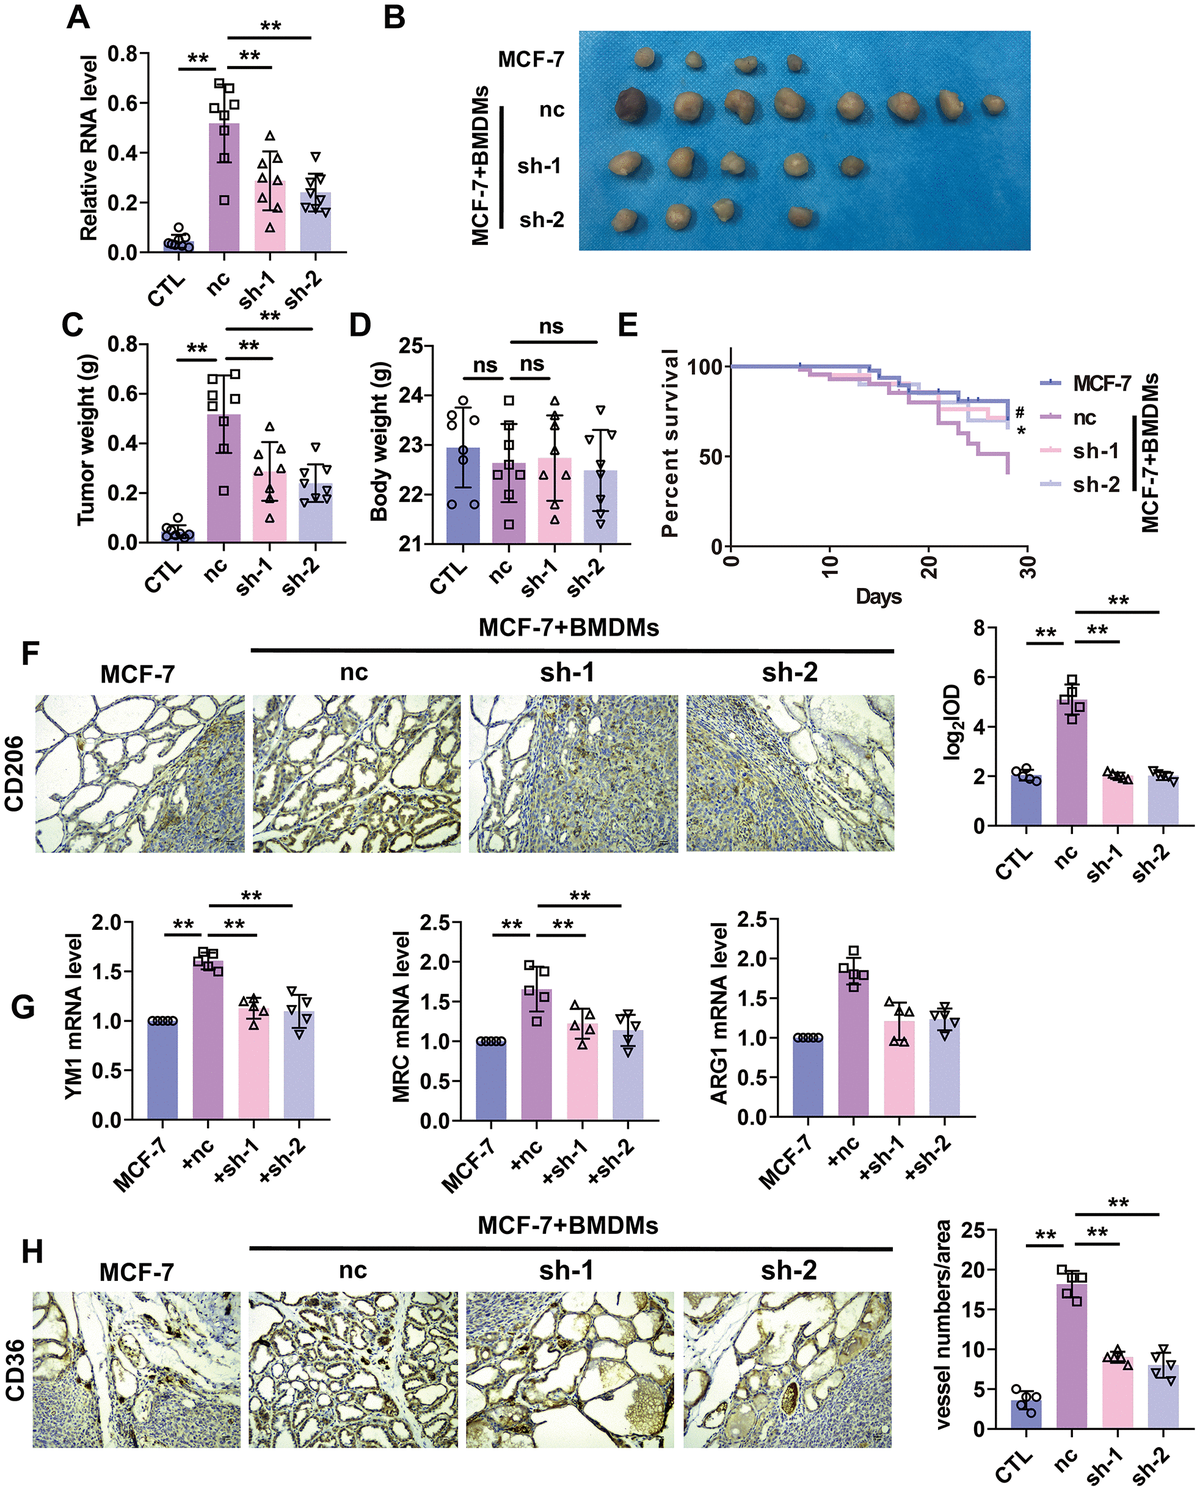 Silencing of lncRNA-SNHG1 suppressed BMDMs-induced tumor growth and angiogenesis. (A) qRT-PCR analysis was performed to measure the RNA level of lncRNA-SNHG1 after transfection of Adv-lncRNA-SNHG1 in BMDMs. Two-tailed t-test was used for the statistical analysis. n=5 independent cell cultures. The bar indicates the SD values. **PB, C) The tumors formed in mice at the endpoint of mice study. Two-tailed t-test was used for the statistical analysis. n=7 mice per group. The bar indicates the SD values. **PD) Body weight of mice was measured at the endpoint of mice study. Two-tailed t-test was used for the statistical analysis. n=7 mice per group. The bar indicates the SD values. **PE) Survival curve was shown by counting dead mice of three groups. n=20 mice per group. #PF) IHC staining of CD206 of tumor tissues was performed. Two-tailed t-test was used for the statistical analysis. n=5 mice per group. The bar indicates the SD values. **PG) qRT-PCR analysis was performed to measure the RNA level of M2 polarization markers in tumor tissues. n=5 mice per group. The bar indicates the SD values. **PH) IHC staining of CD31 of tumor tissues was performed. Two-tailed t-test was used for the statistical analysis. n=5 mice per group. The bar indicates the SD values. **P